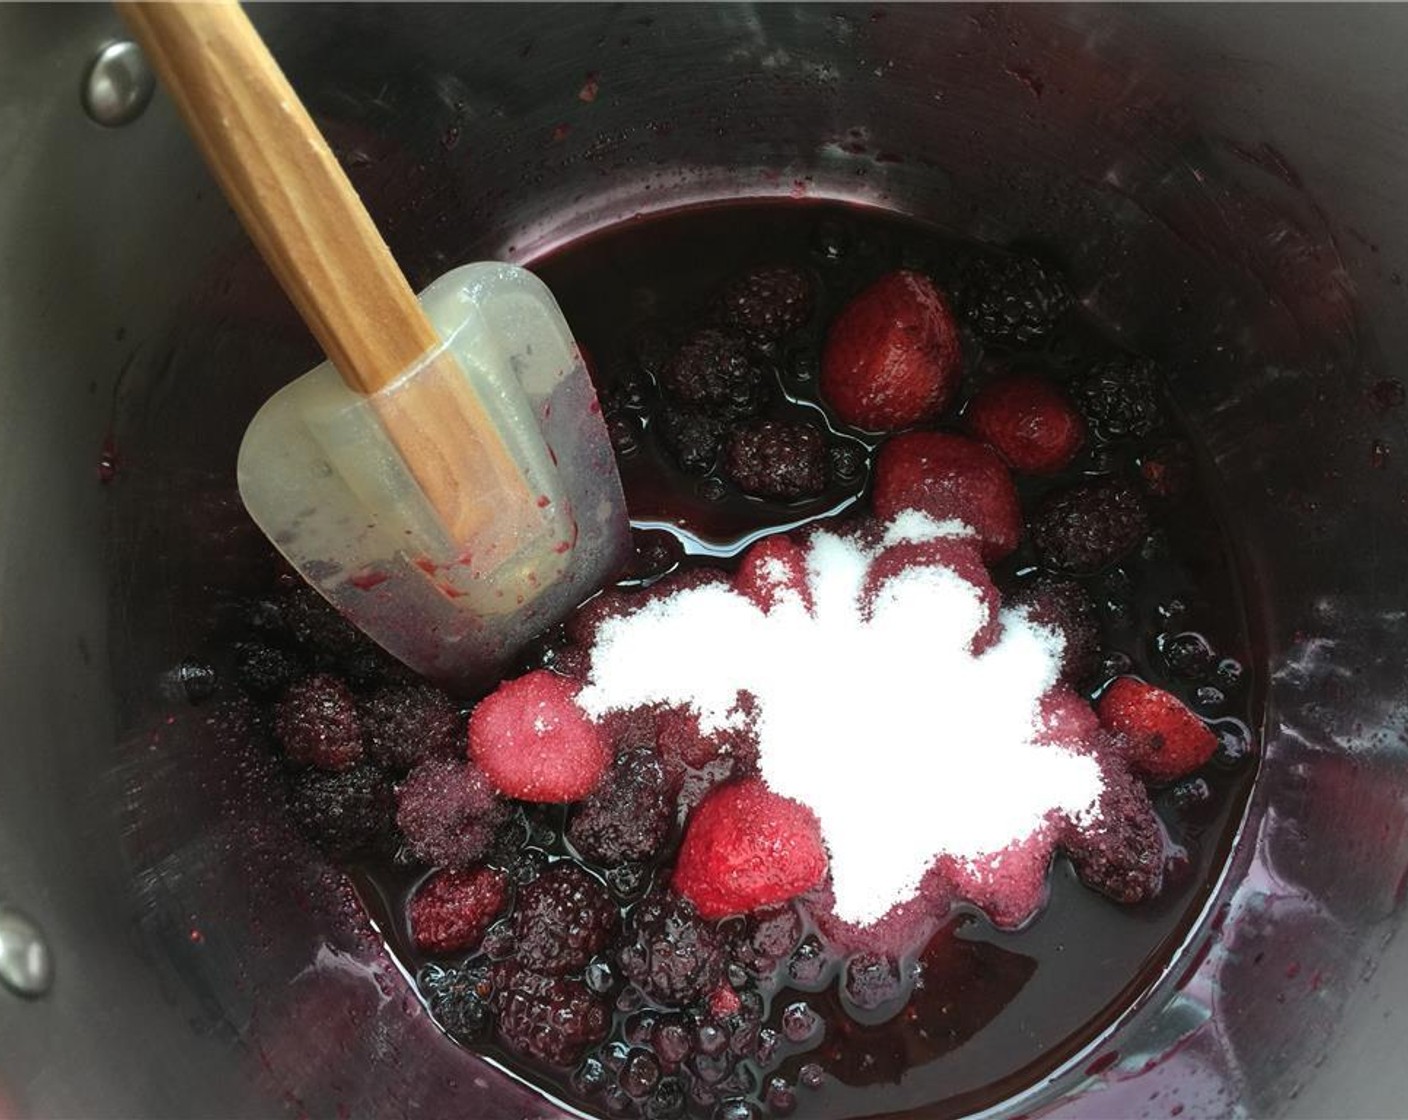 step 5 While the panna cotta is chilling, pour the Fresh Mixed Berries (2 2/3 cups) and Granulated Sugar (1/2 cup) into a medium saucepan and cook over medium heat.